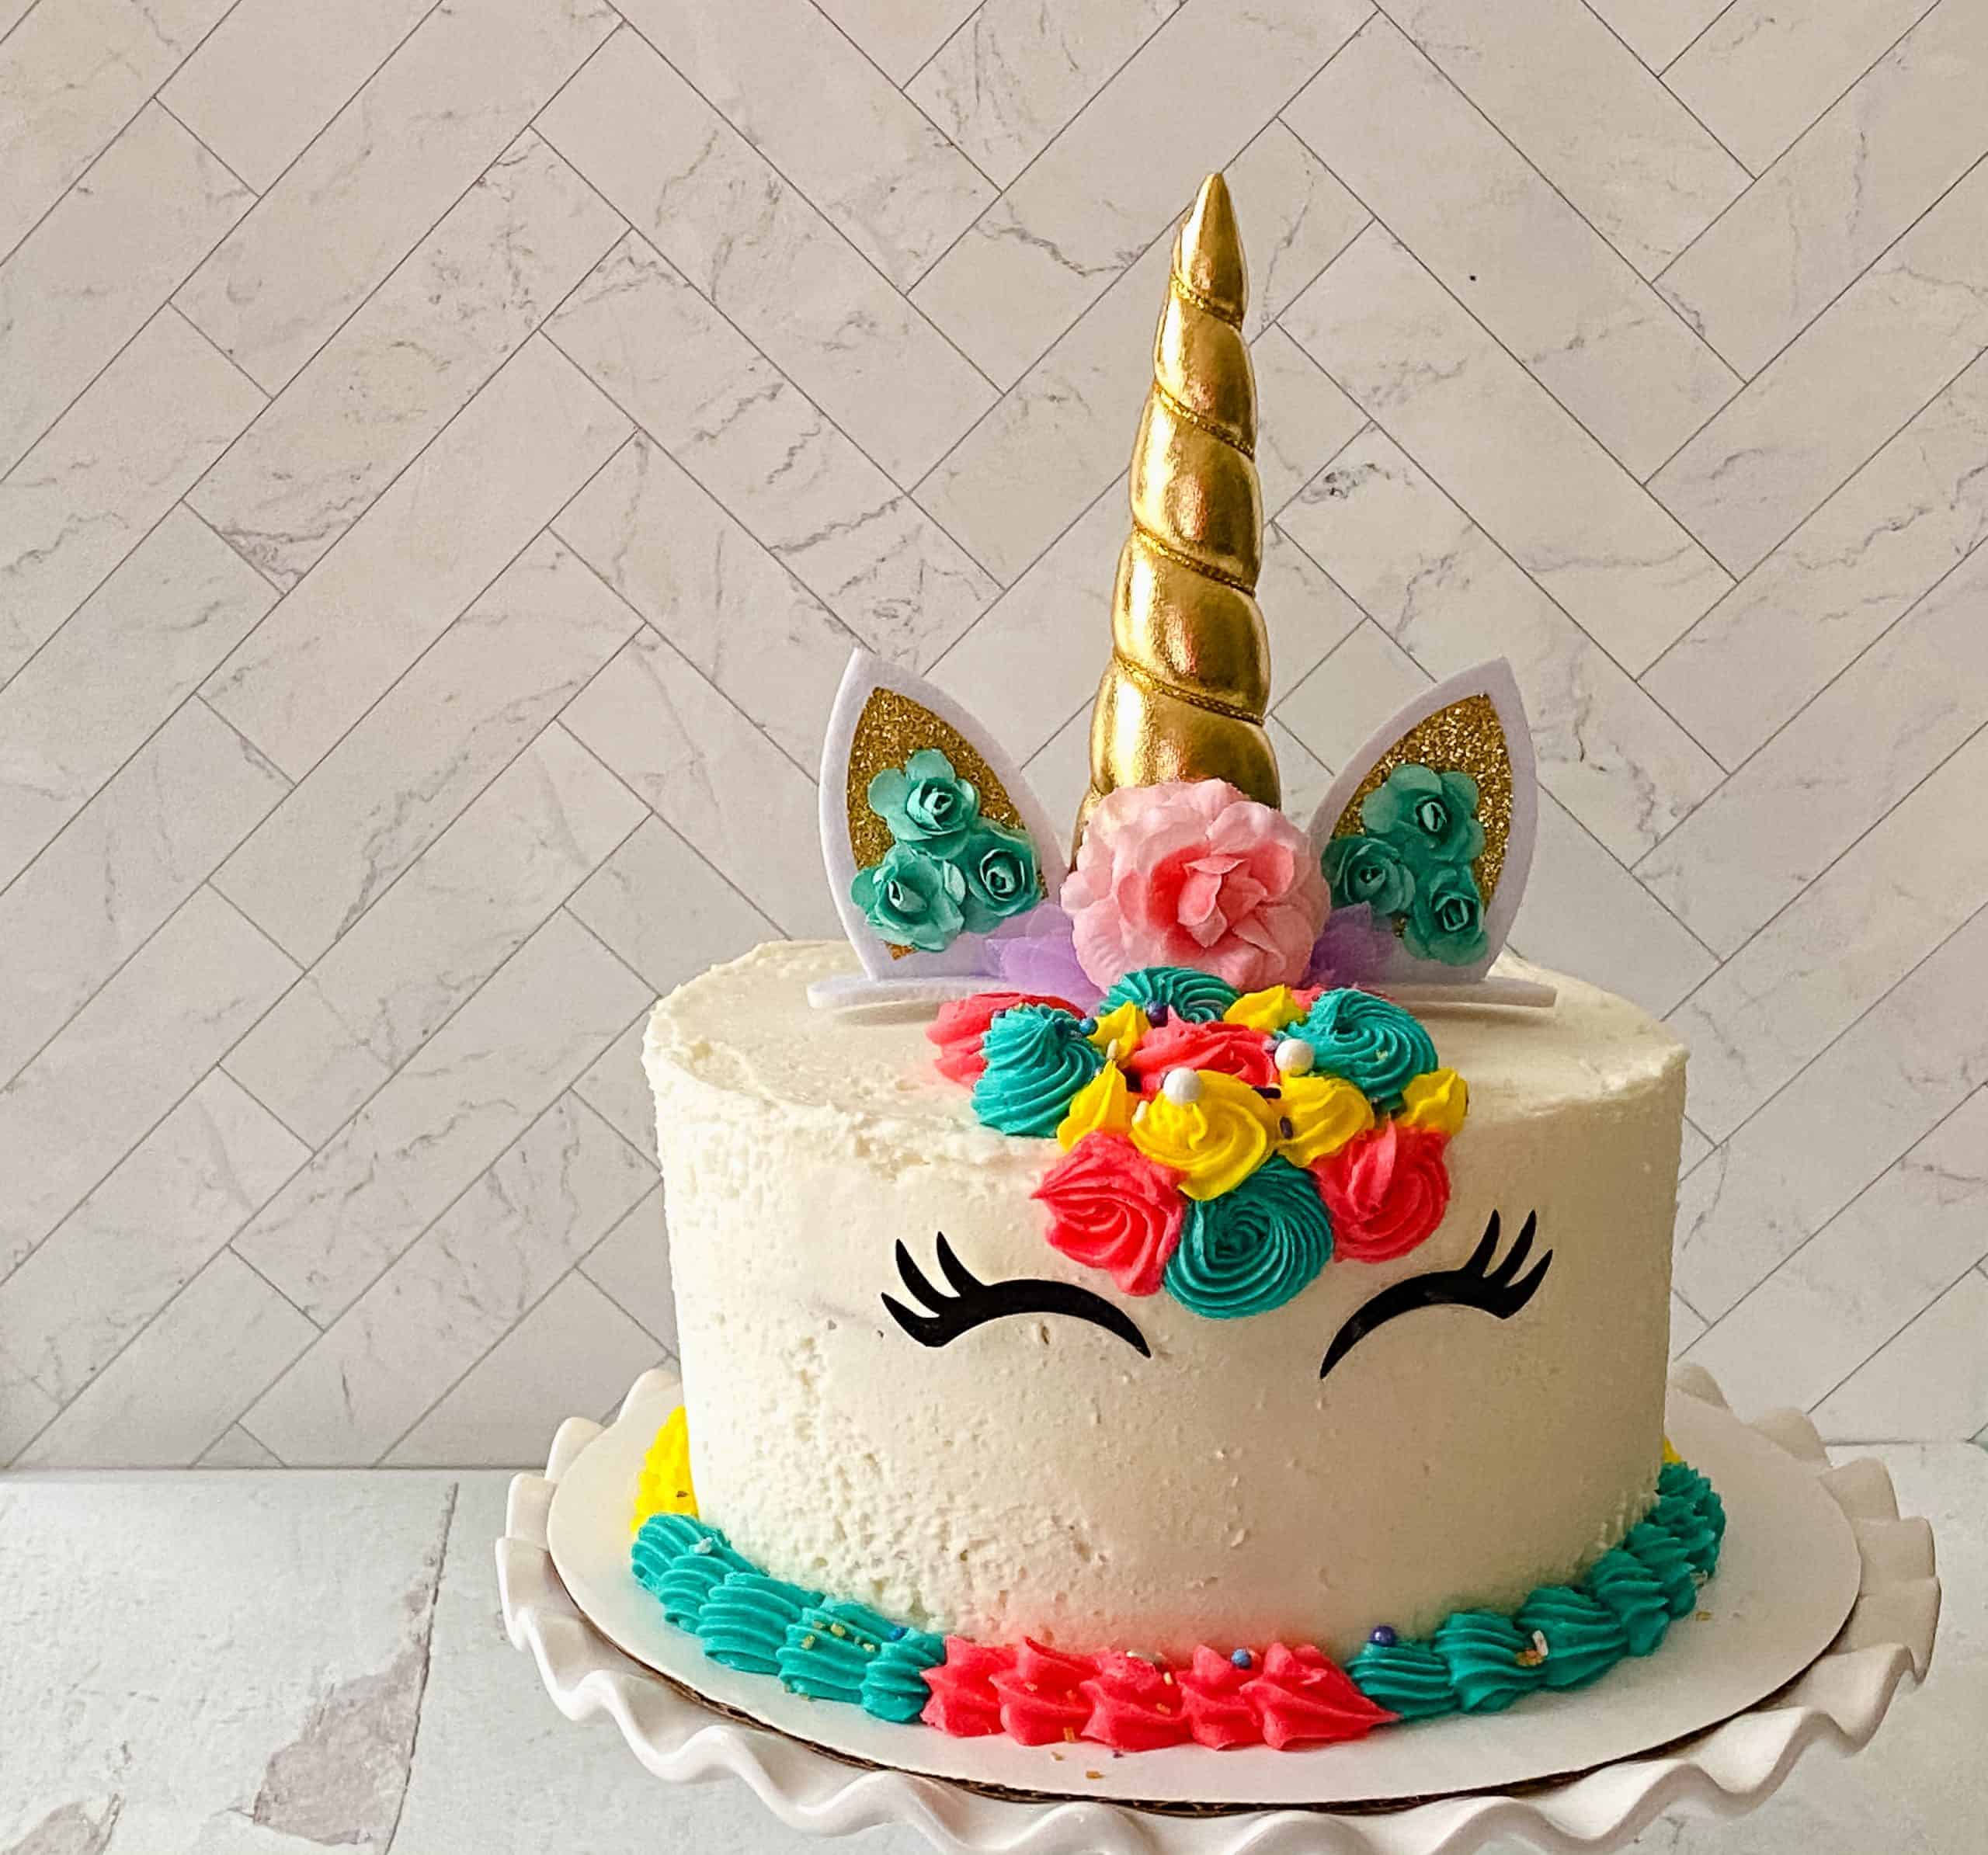 How To Make A Spectacular and Easy Unicorn Cake (With Video!)